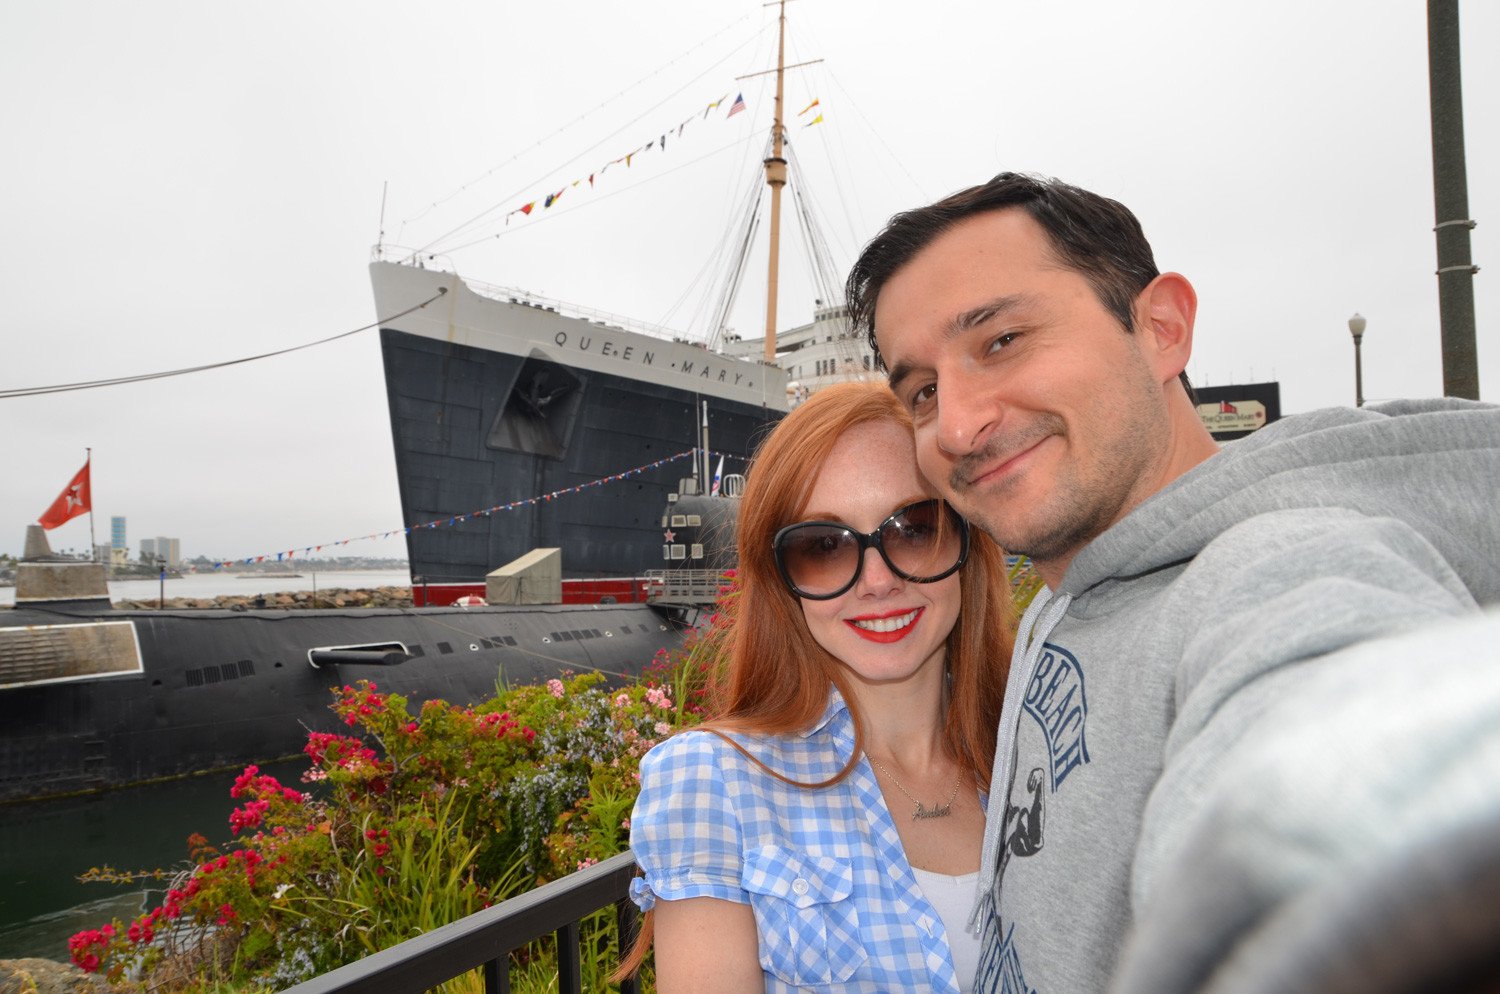 Visiting the Queen Mary in Long Beach, California